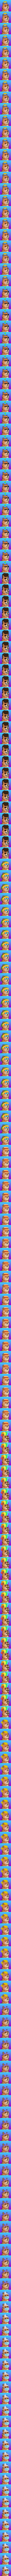 CyberDoge collection image